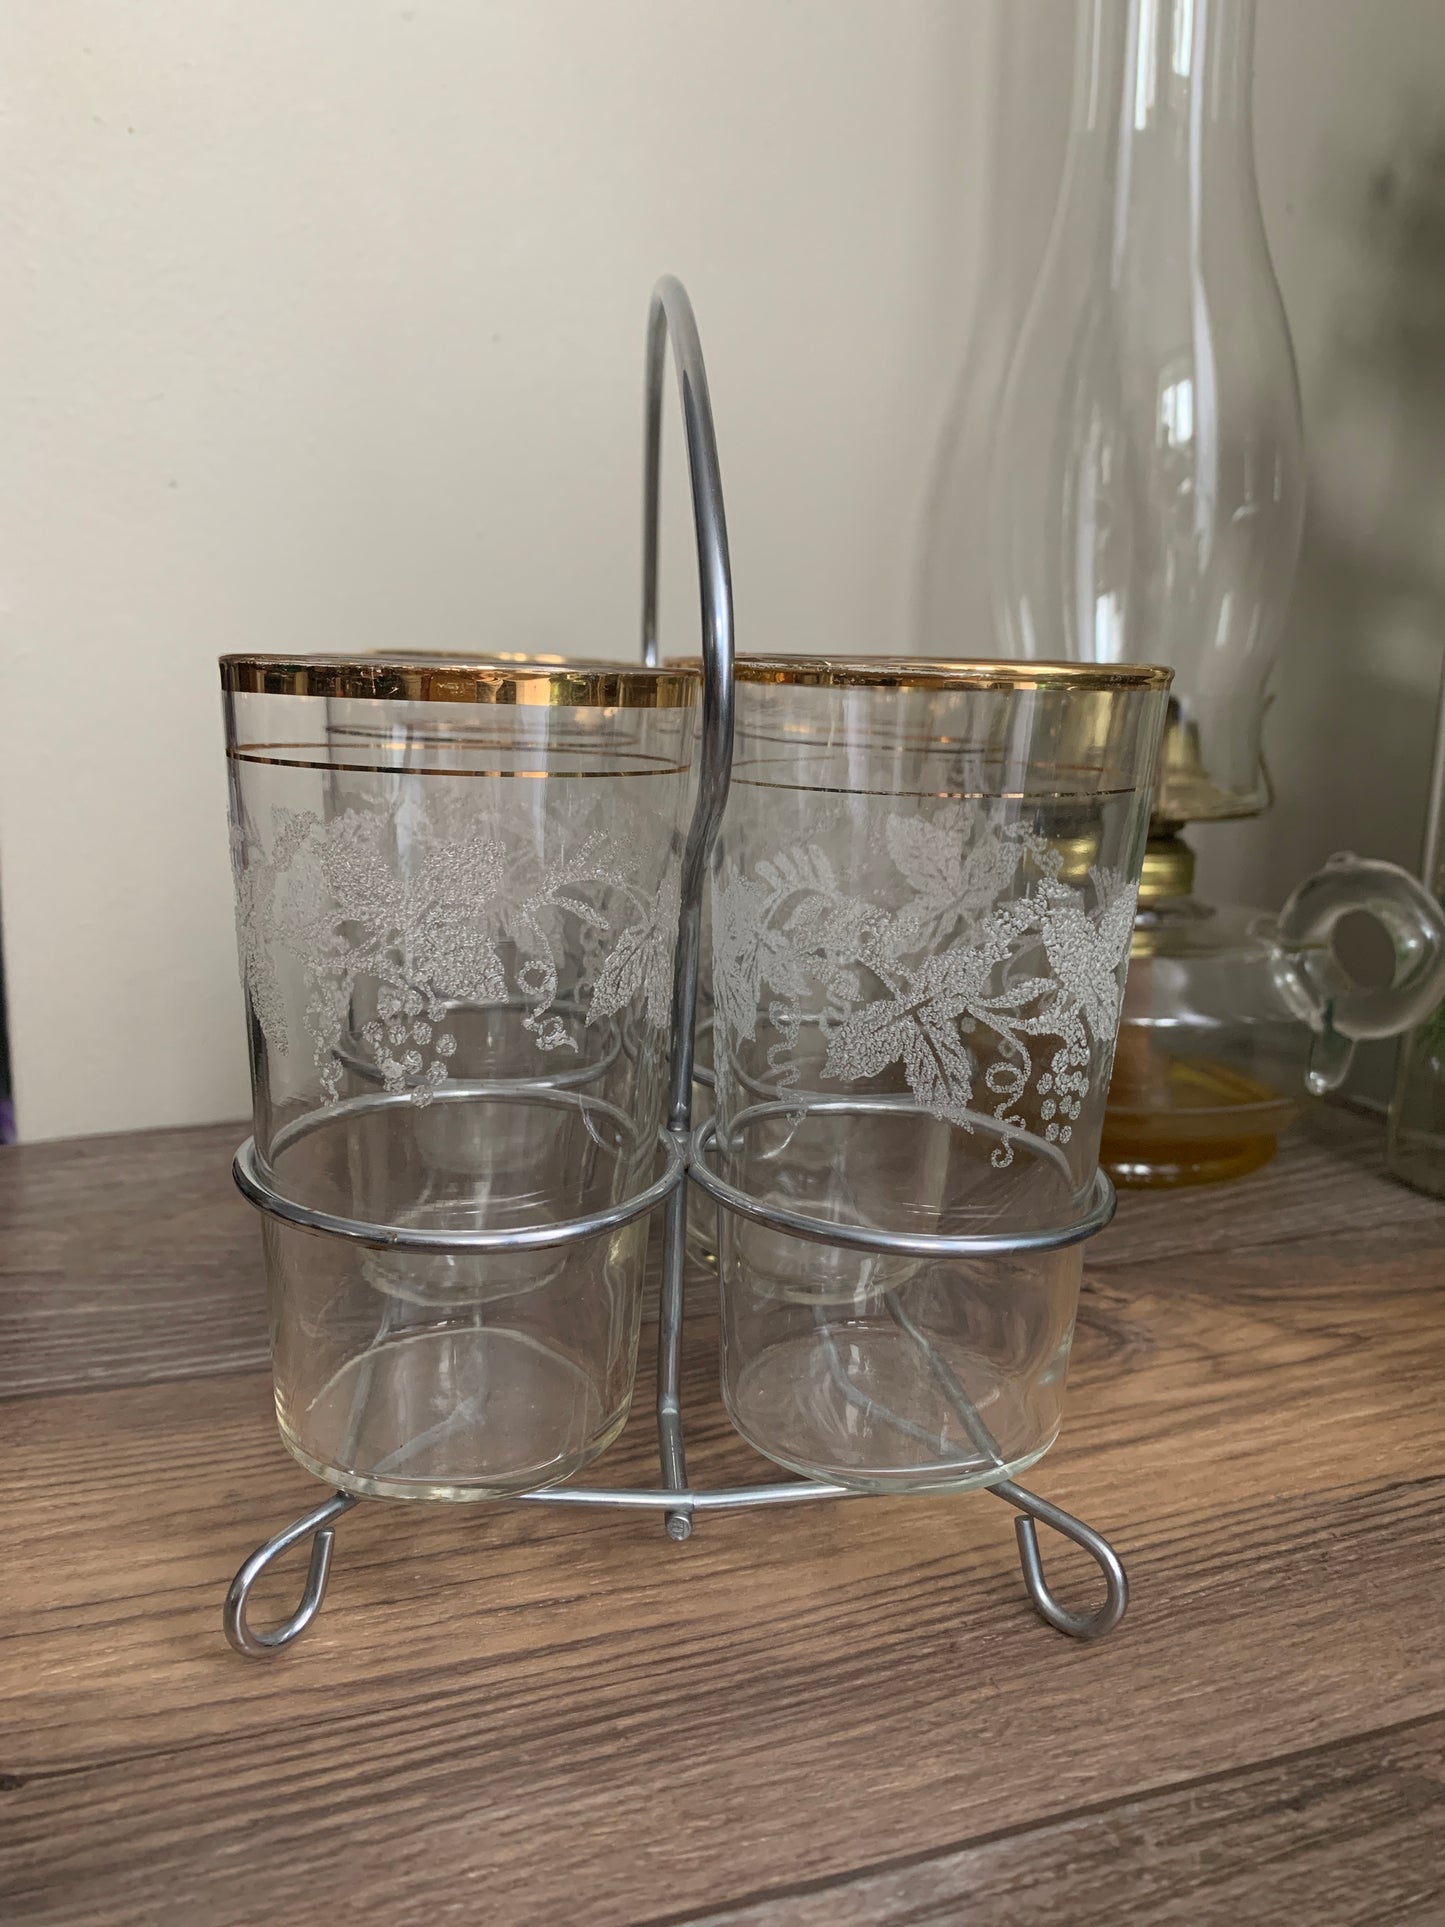 Vintage Cocktail Glasses in Wire Caddy with Frosted Grapevine Pattern Gold Trim Vintage Barware